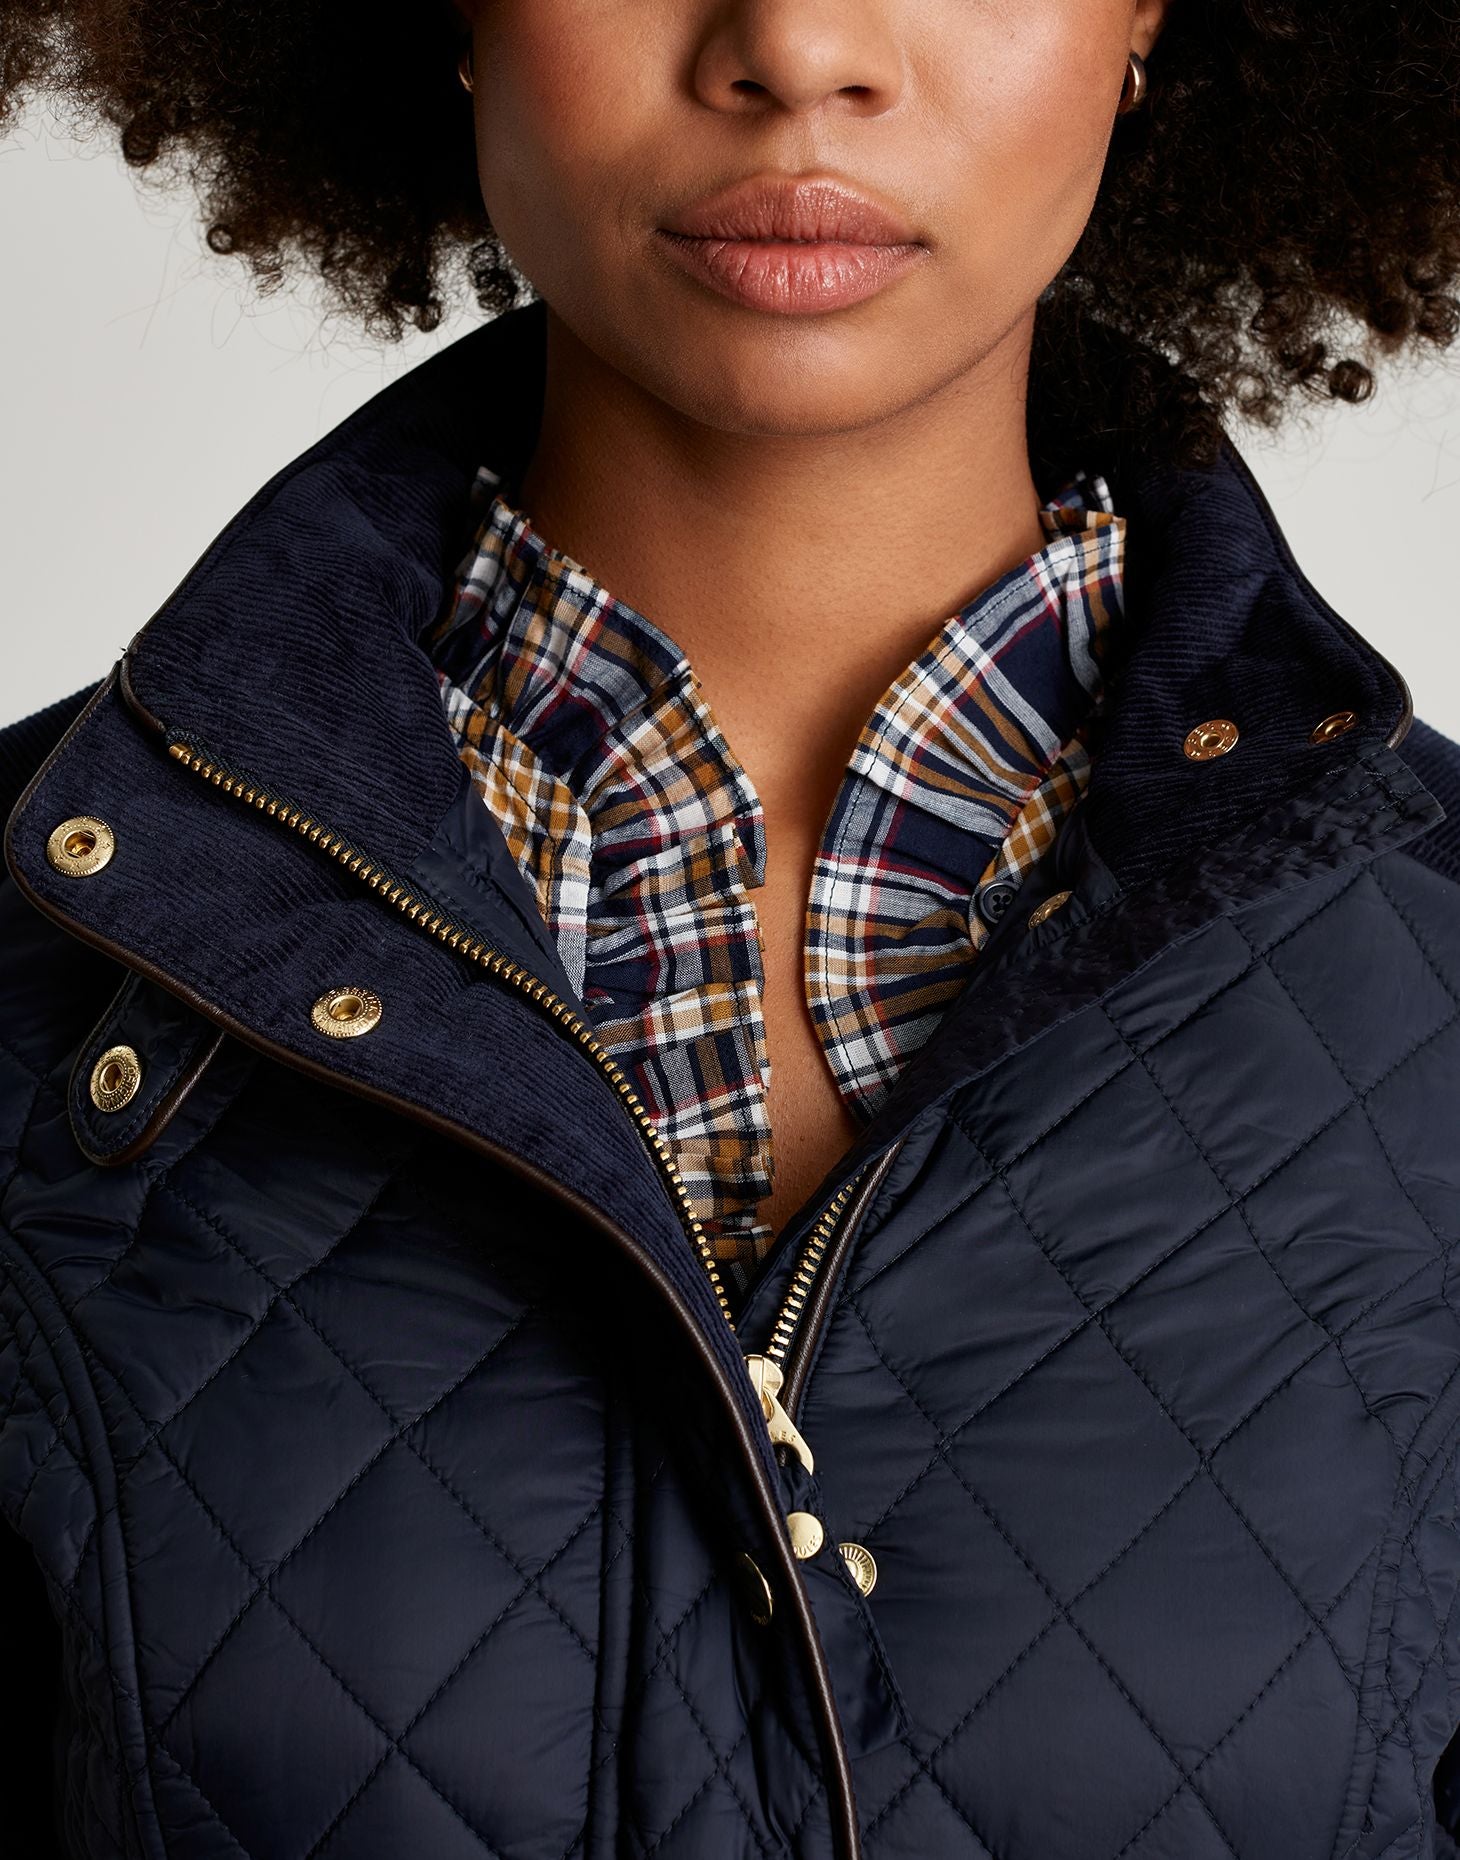 Joules - Women's Newdale Quilted Jacket - MARINE NAVY